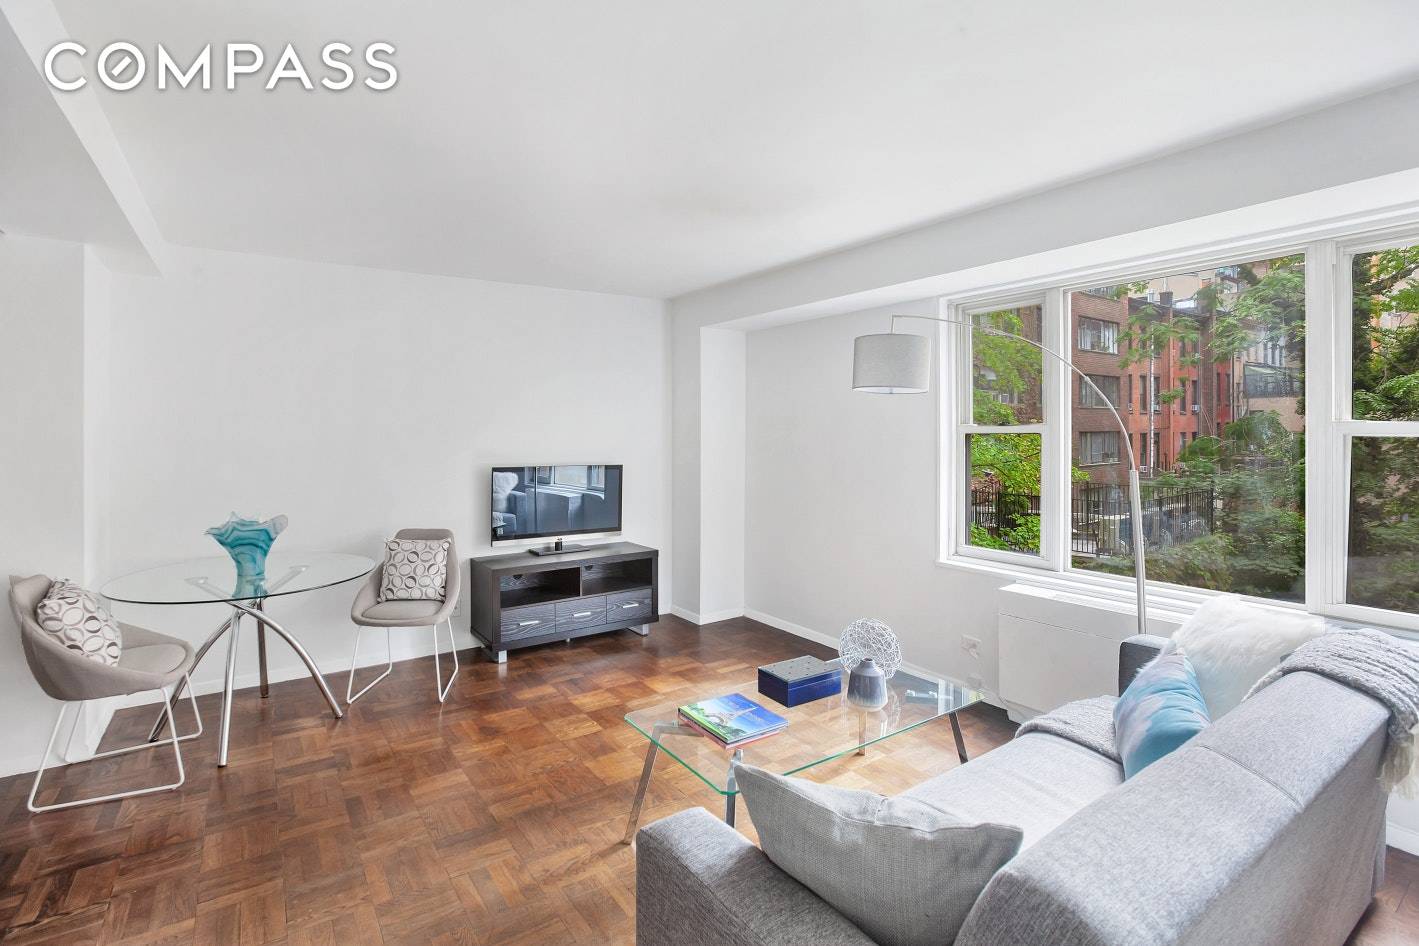 Enjoy tranquil garden views and space in this expansive studio featuring chic modern updates and excellent storage space in a full service Murray Hill co op building.